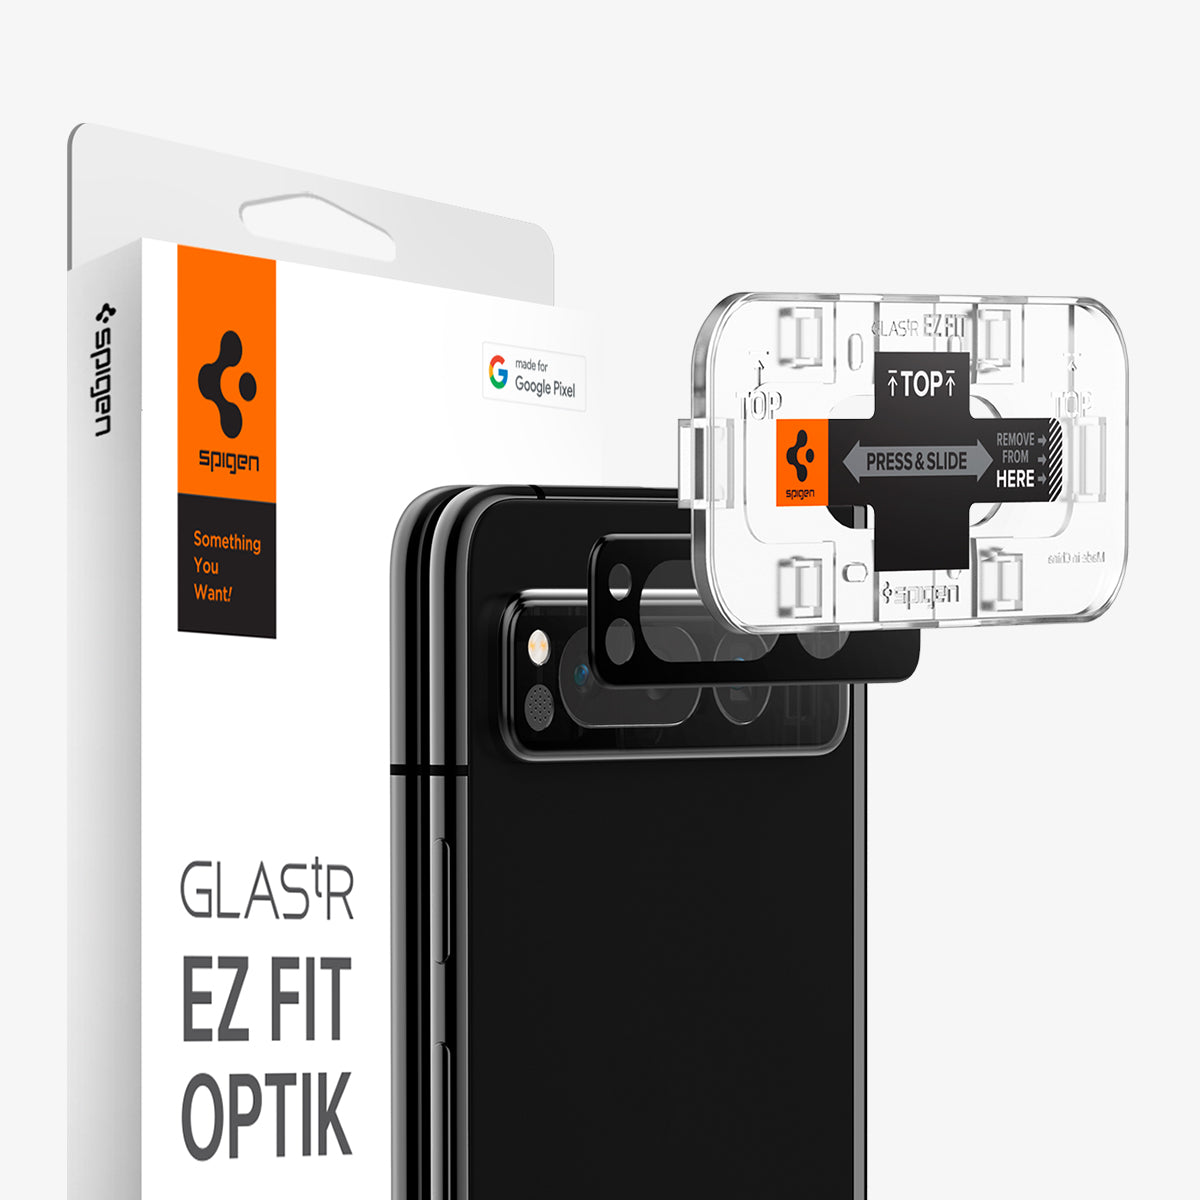 AGL06207 - Google Pixel Fold Optik EZ Fit Lens Protector showing the device, lens protector, ez fit tray and packaging